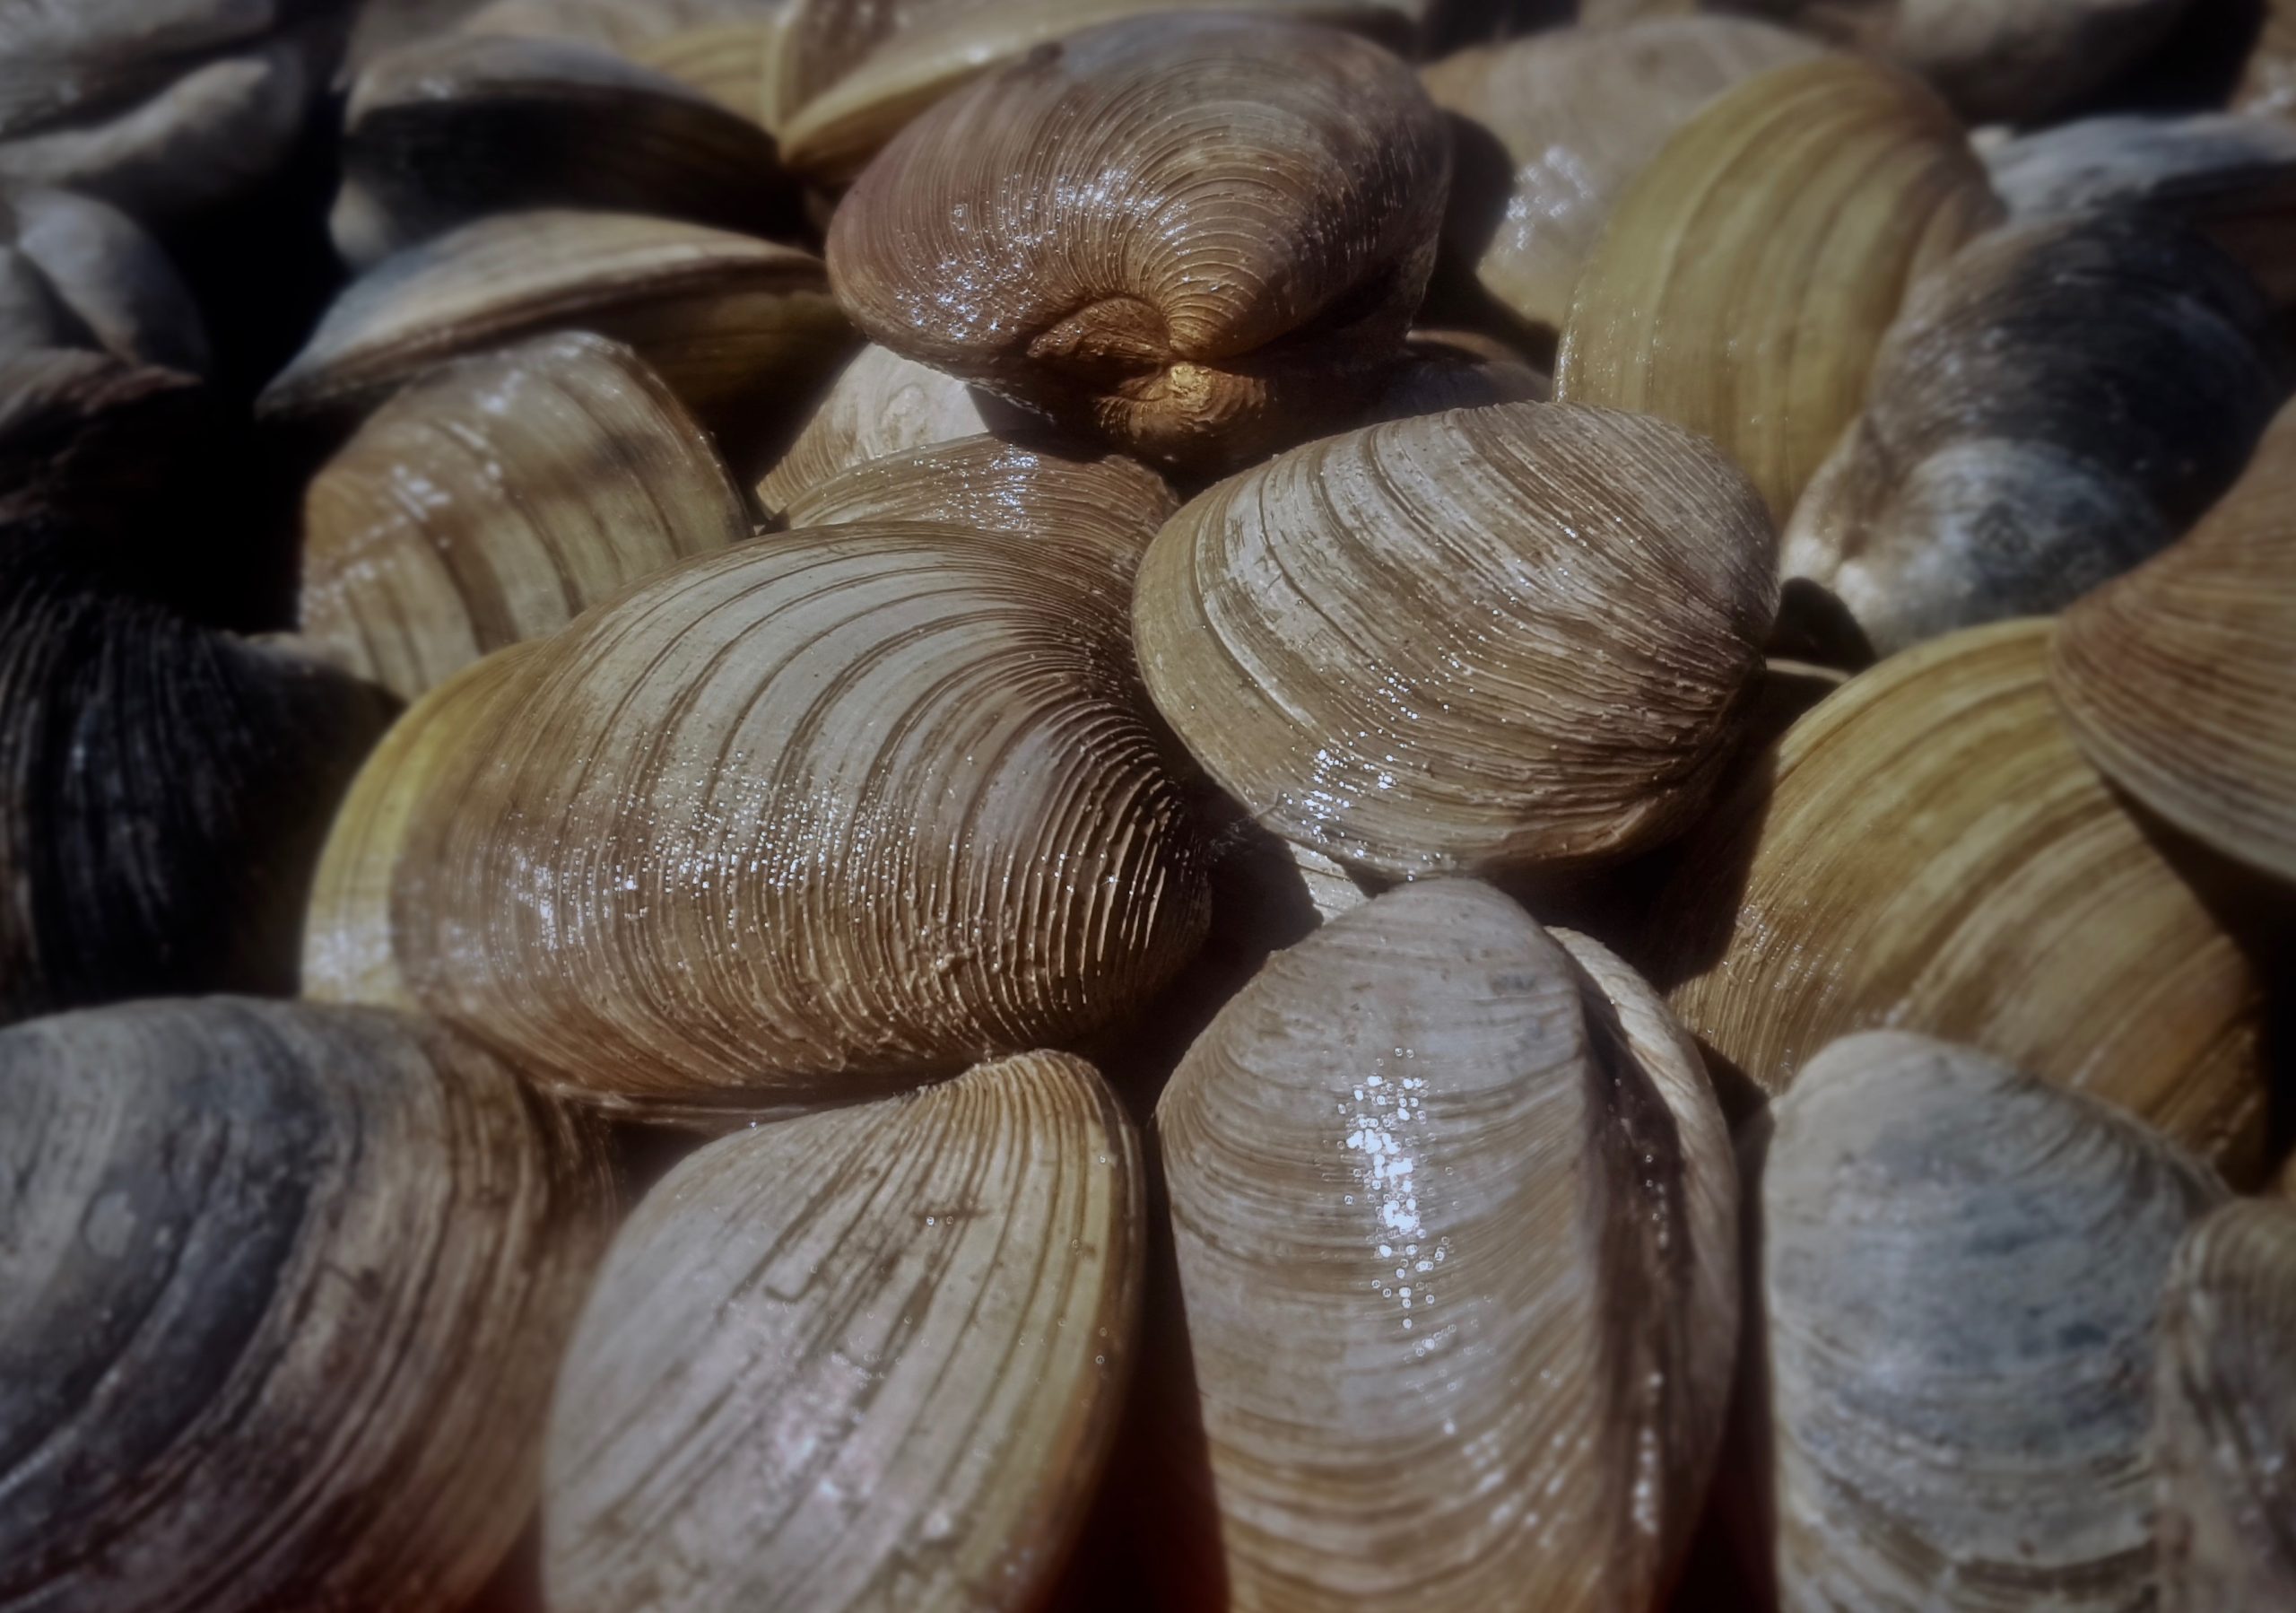 You may know them as just clams, but there’s so much more to Quahogs, a signature Northumberland Shore treat. Here's everything you need to know.